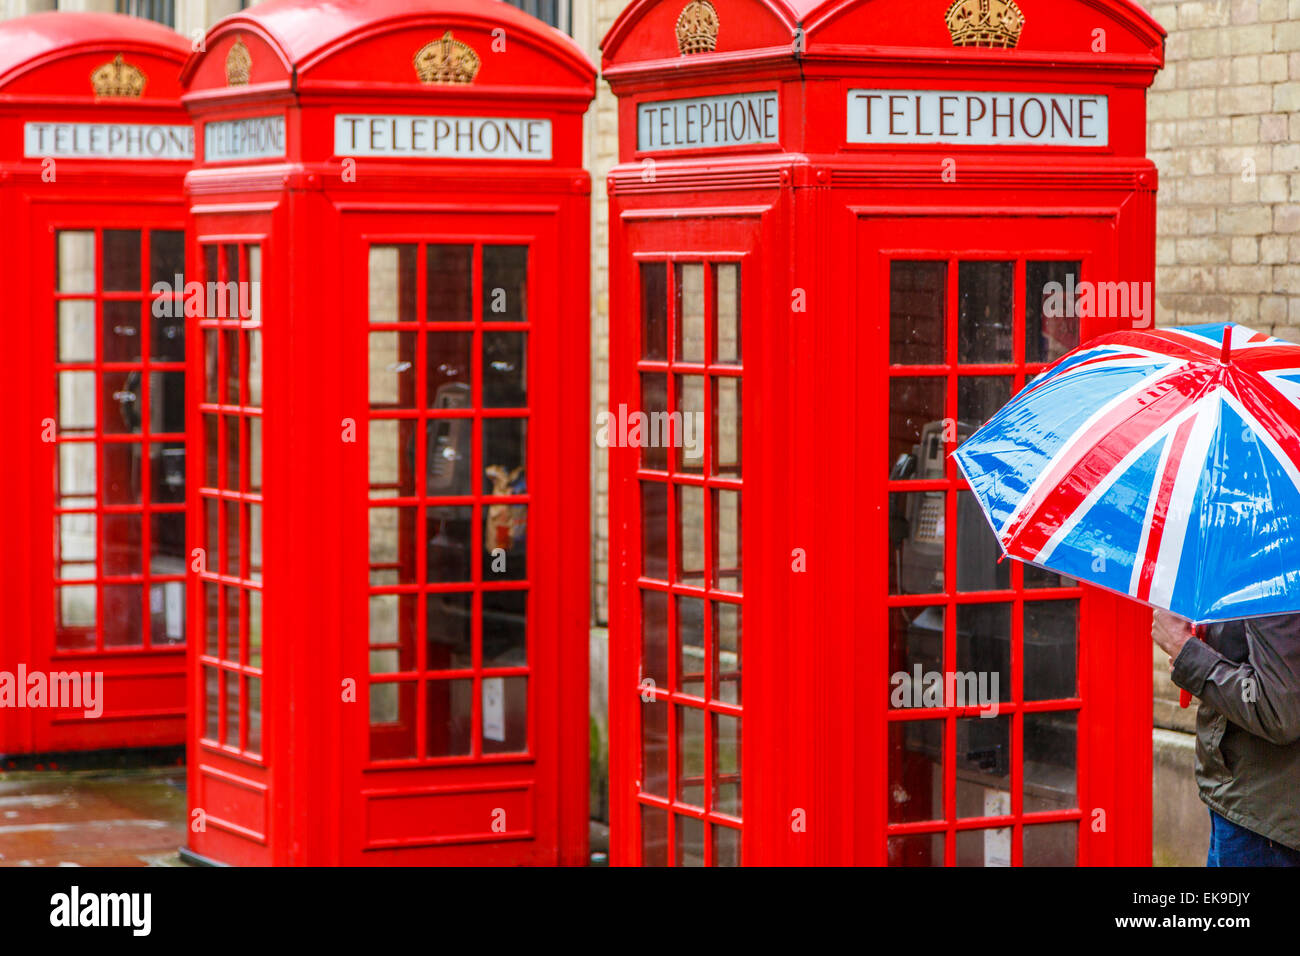 Red London Telephone boxes in the rain with a person holding a Union Jack Umbrella walking past, London England UK Stock Photo